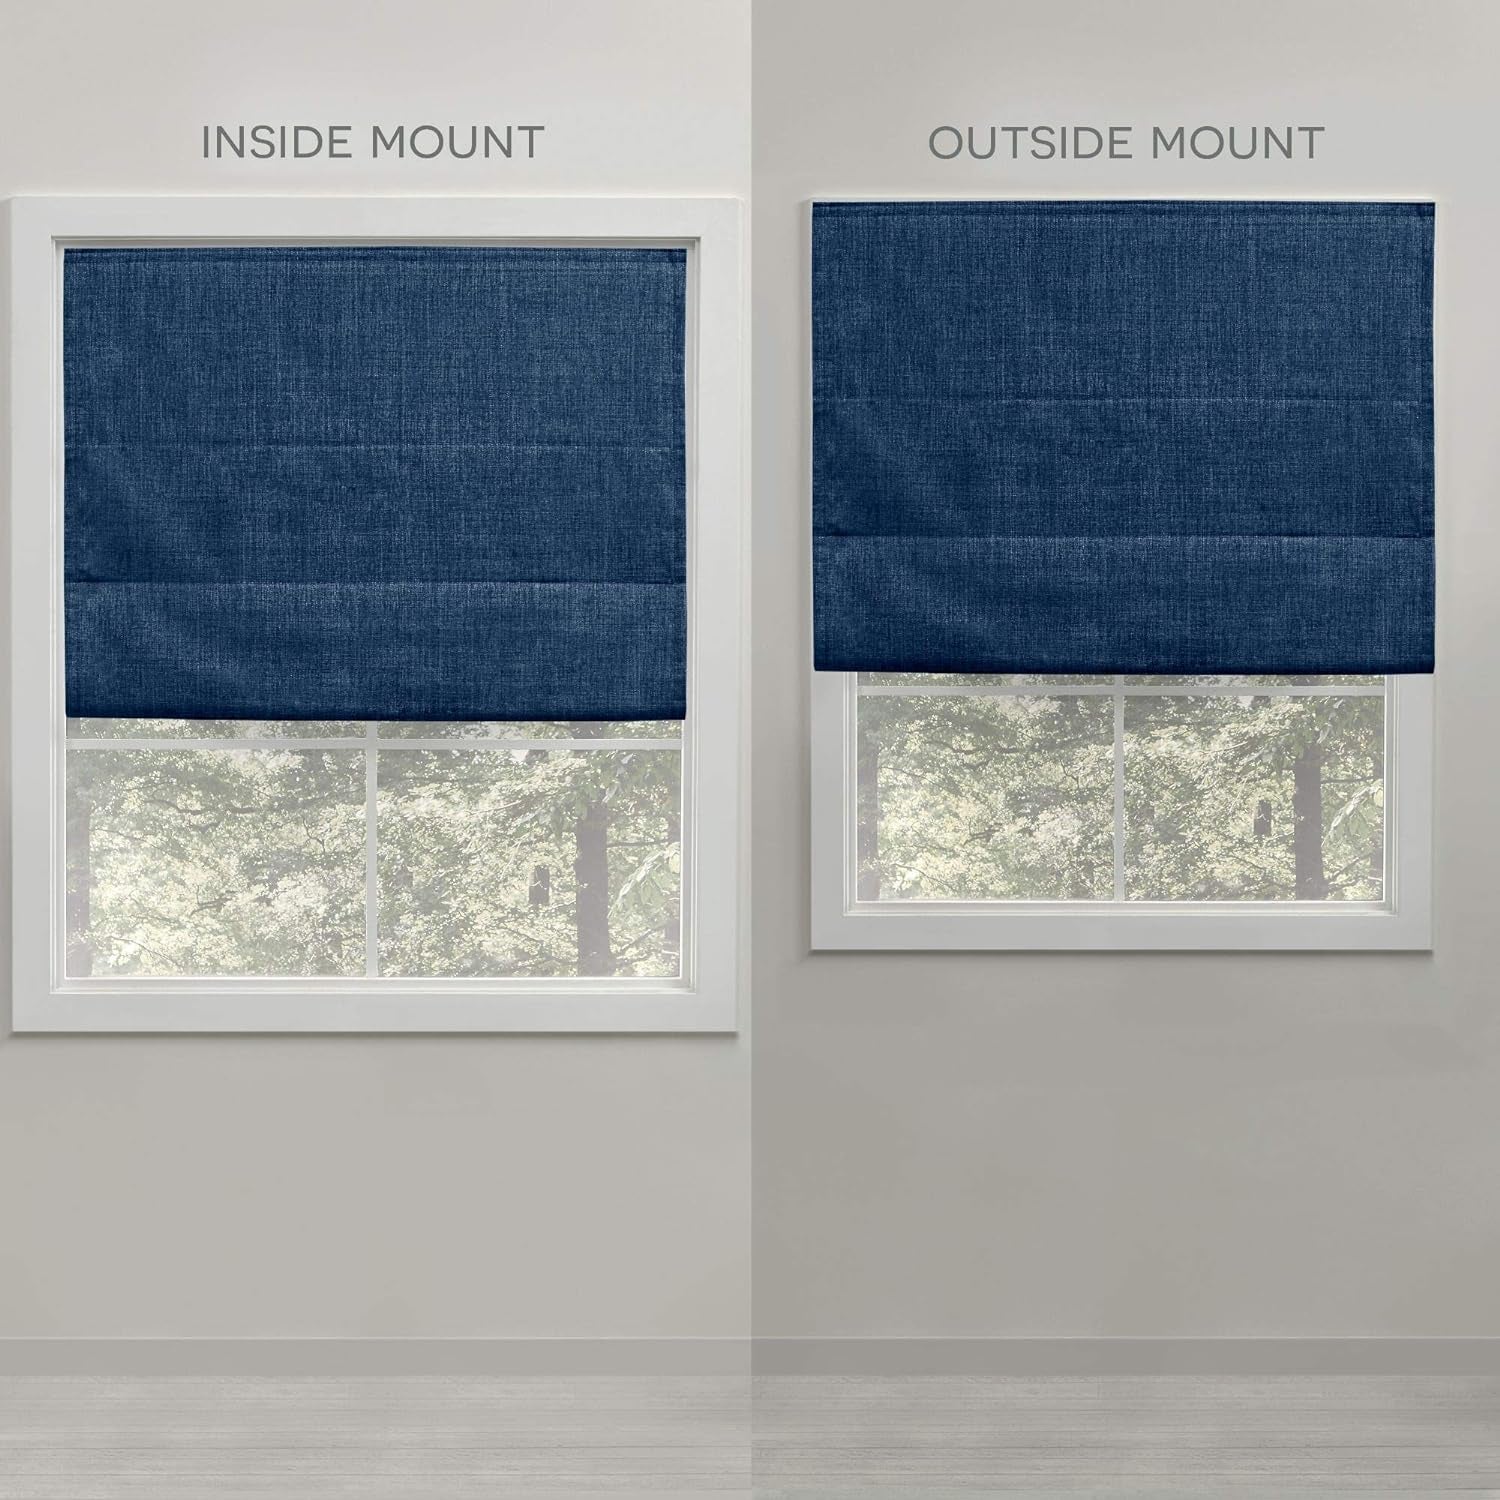 Exclusive Home Curtains Acadia 100% Blackout Roman Shade, 31"X64", Chambray Blue